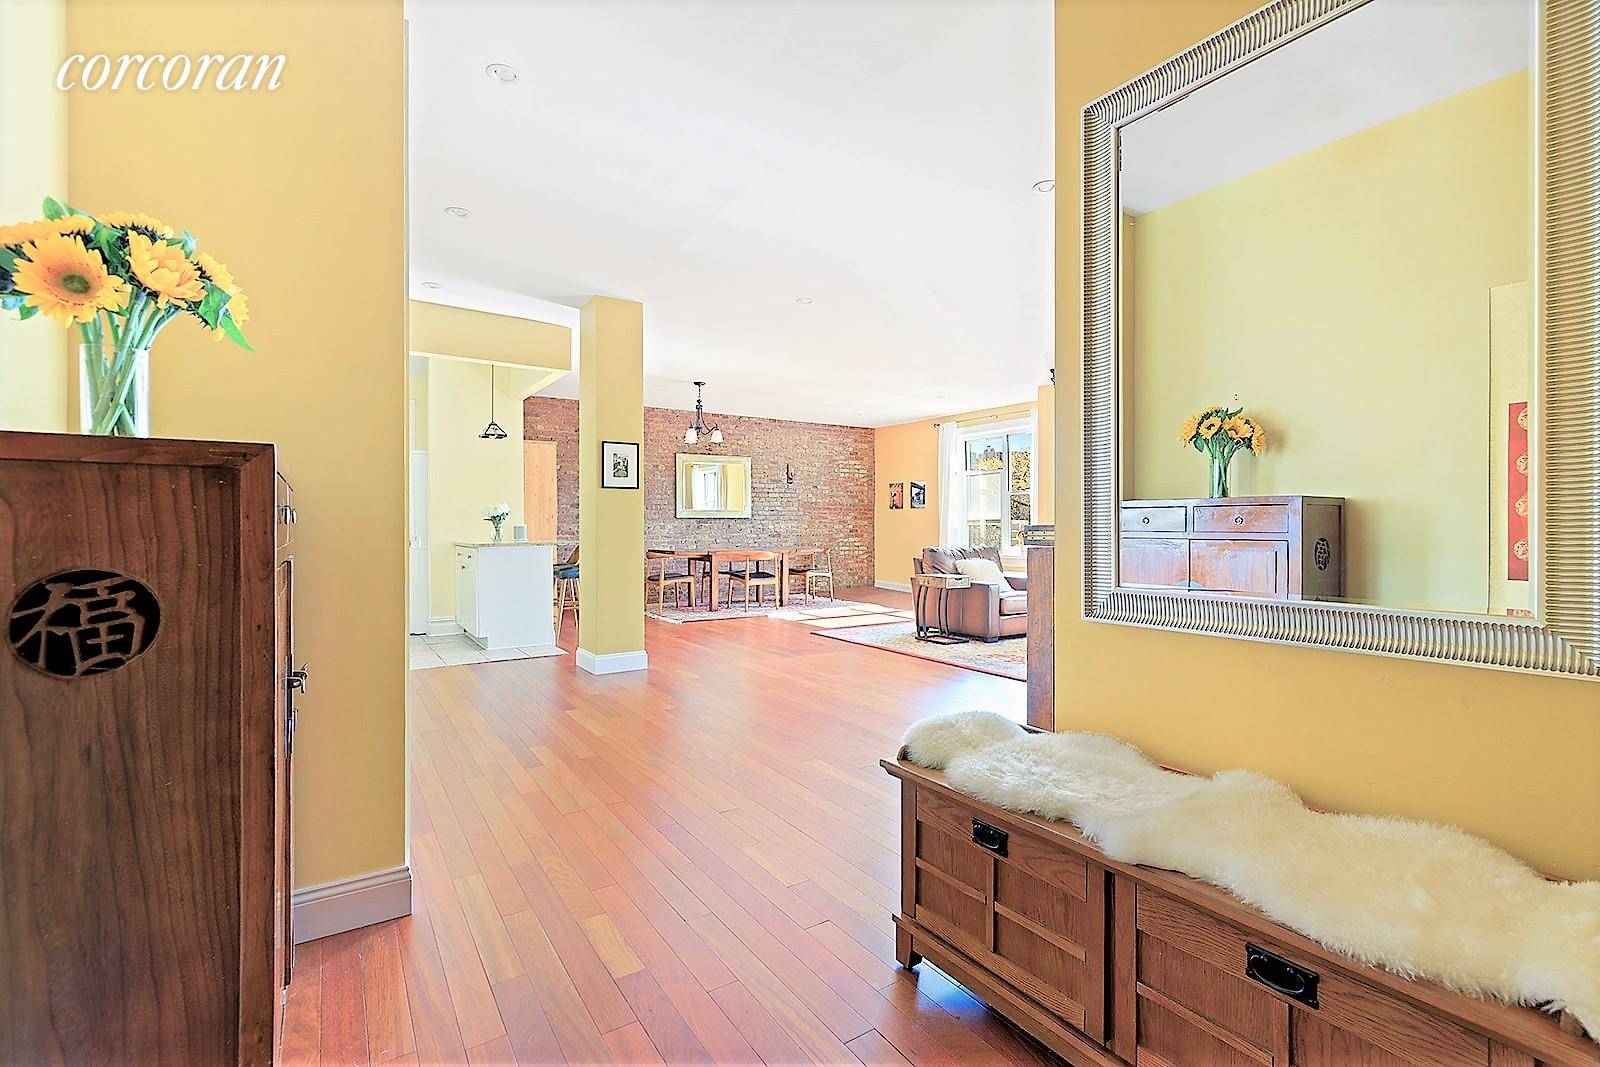 OPEN HOUSE BY APPOINTMENT AT 225 EASTERN PARKWAY 3C ON SUNDAY !